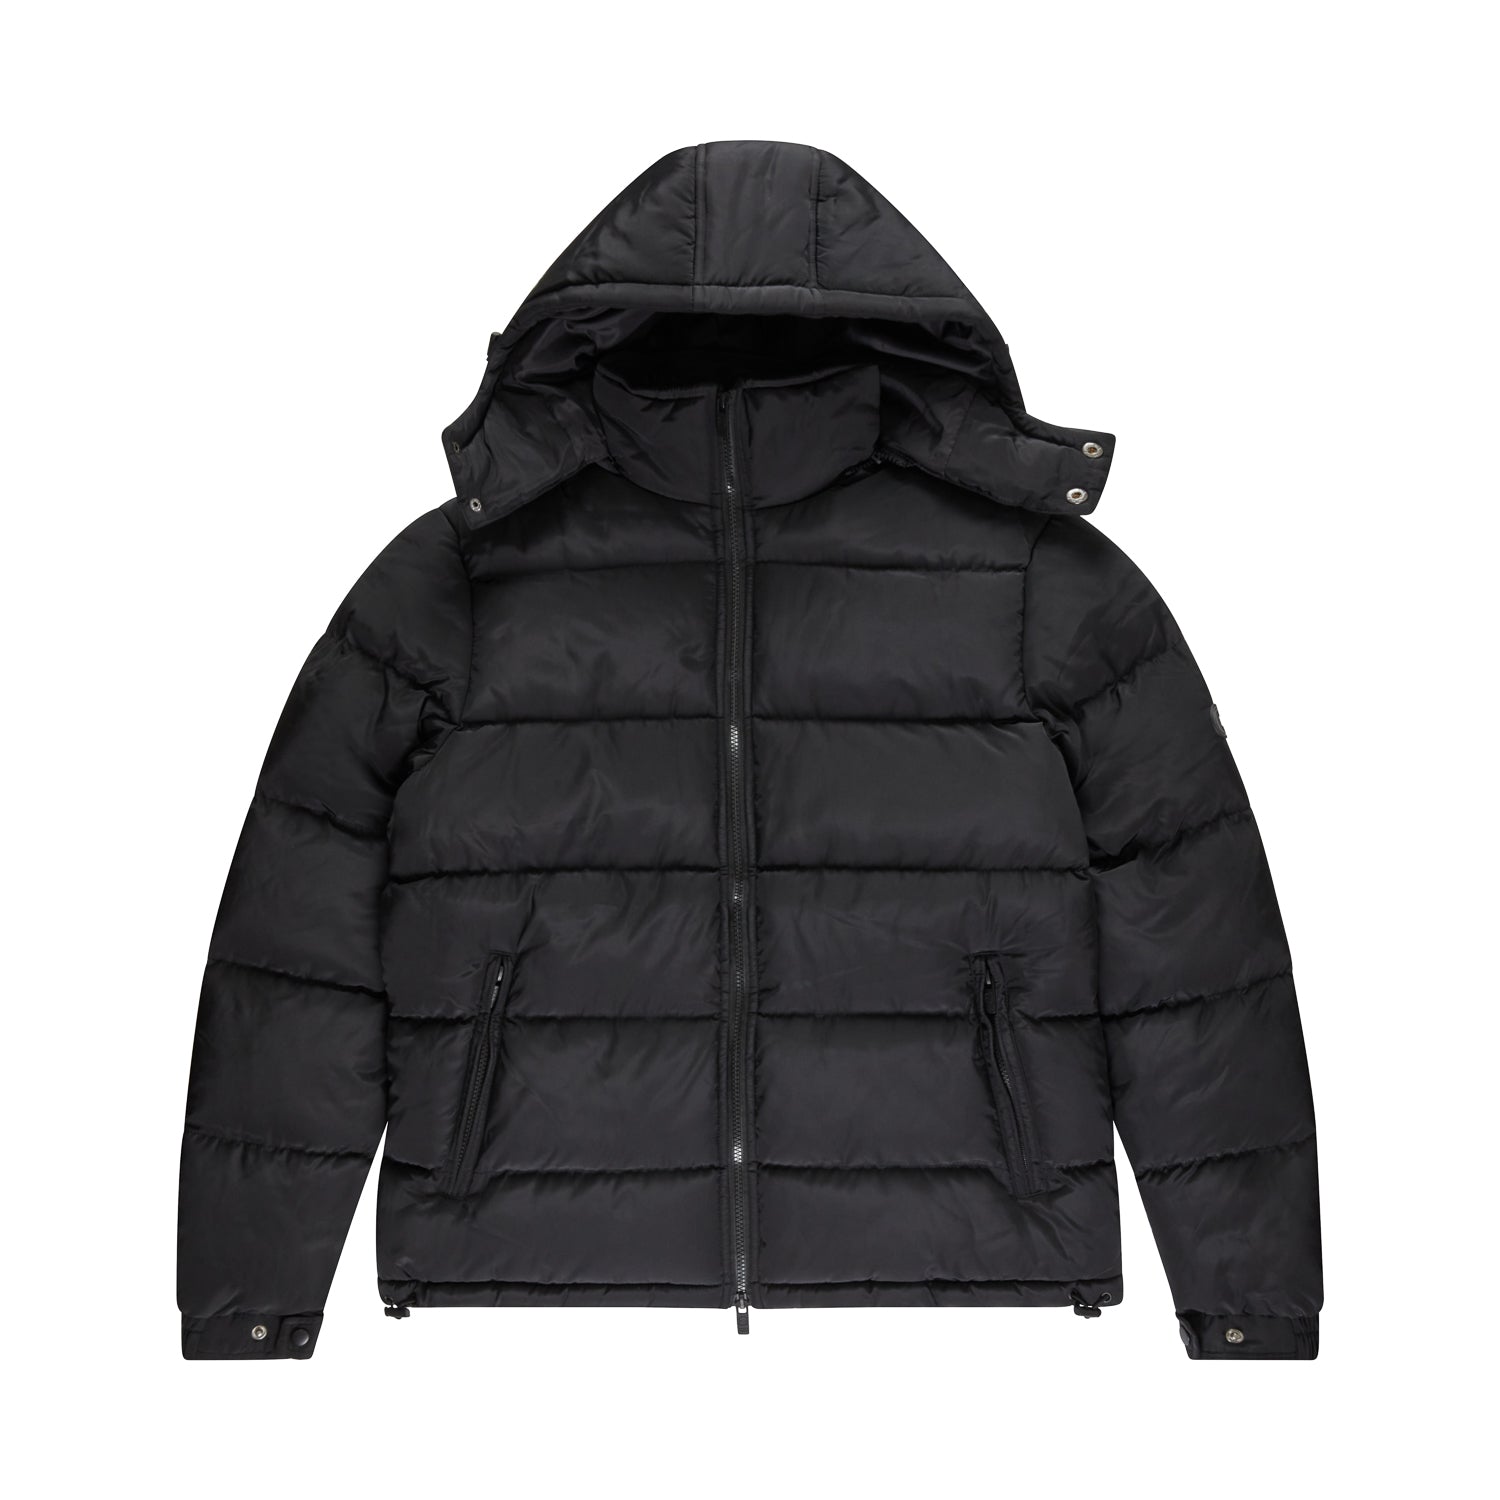 black down jacket with hood - OFF-61% >Free Delivery